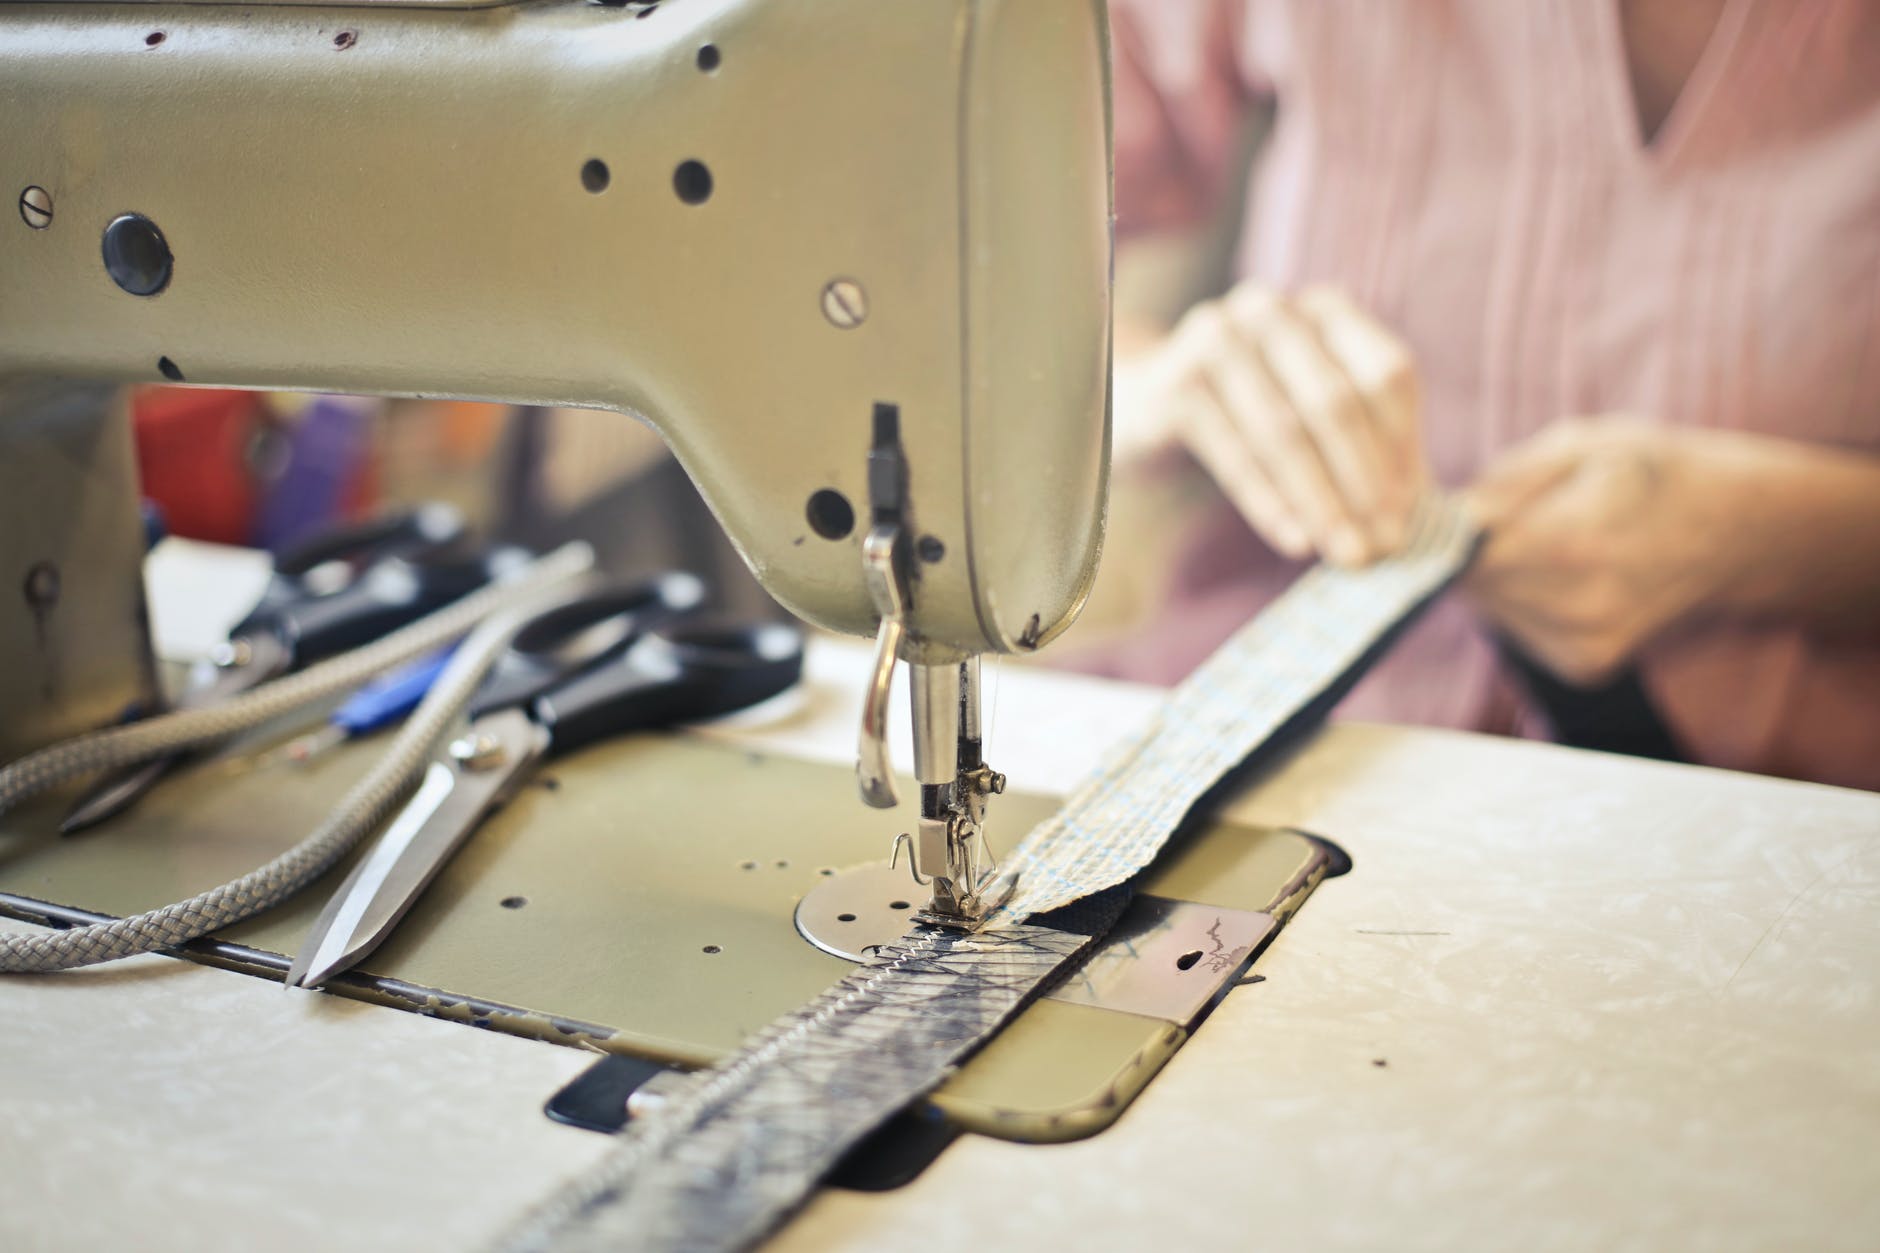 The cost of repairing a sewing machine